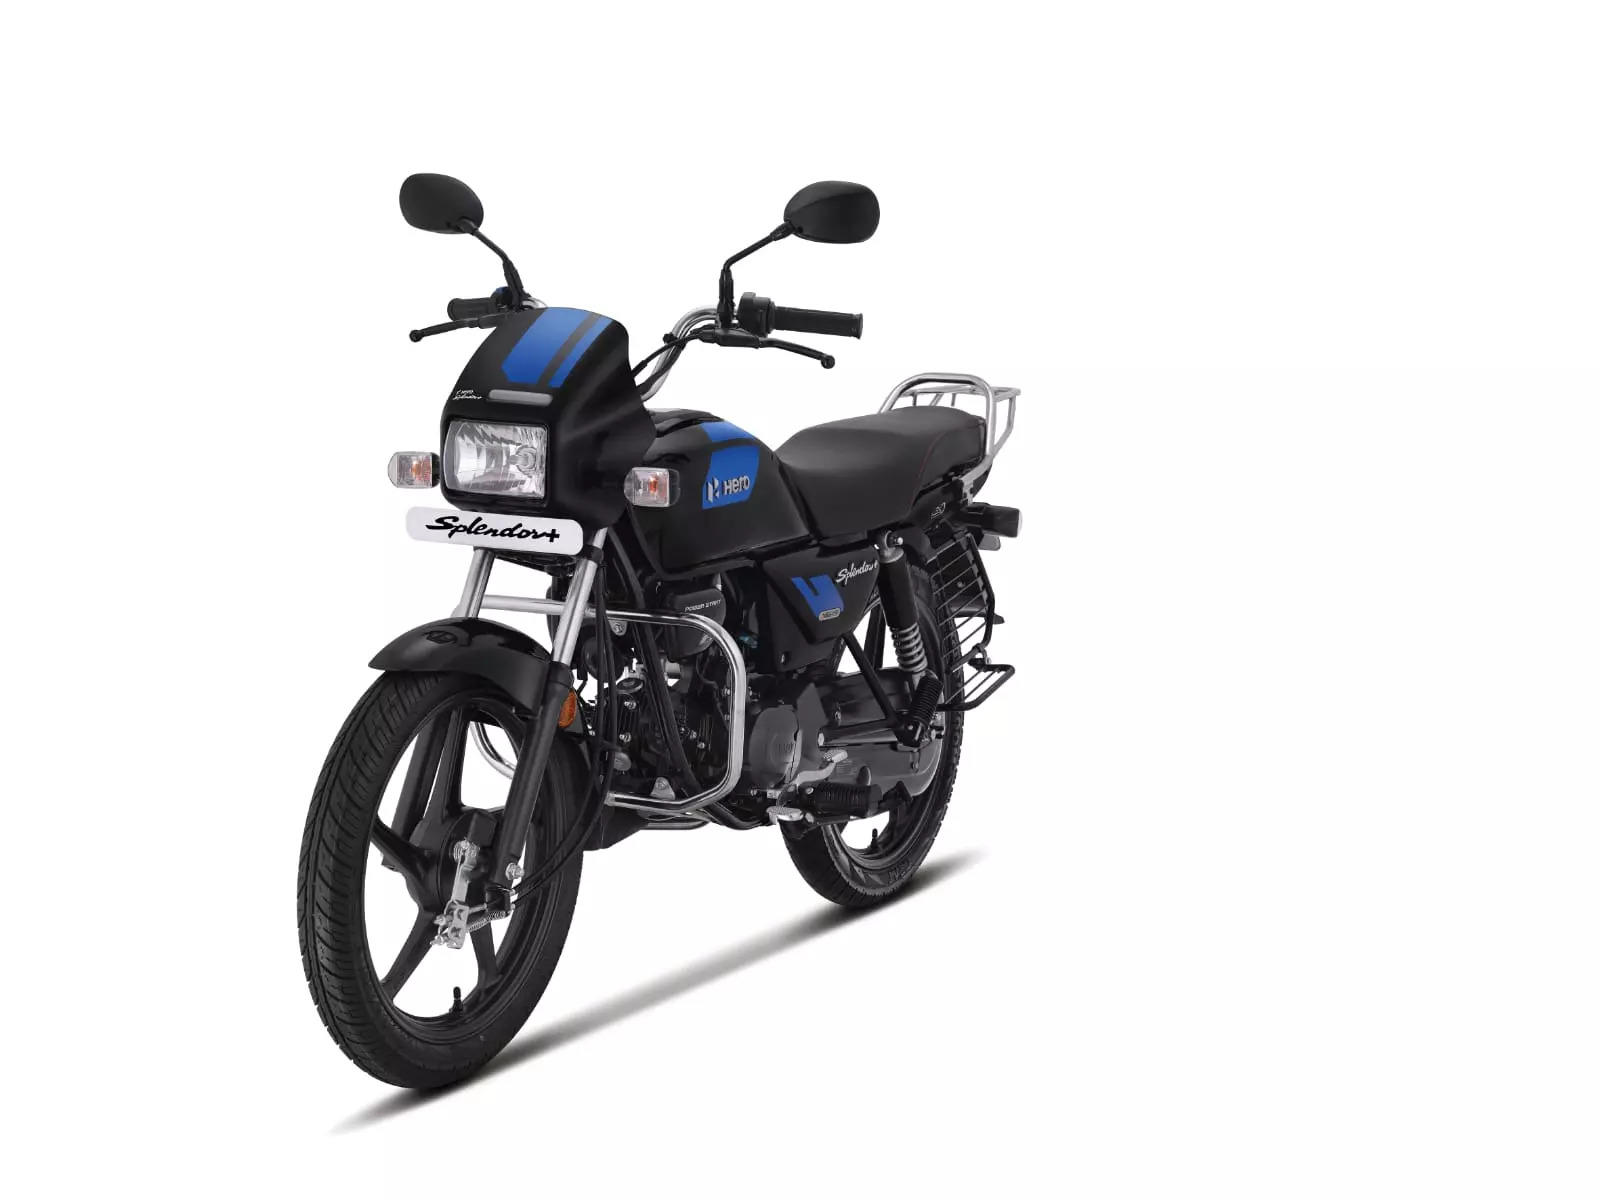 Hero MotoCorp launches the new avatar of its Splendor with a starting price of INR 72,900